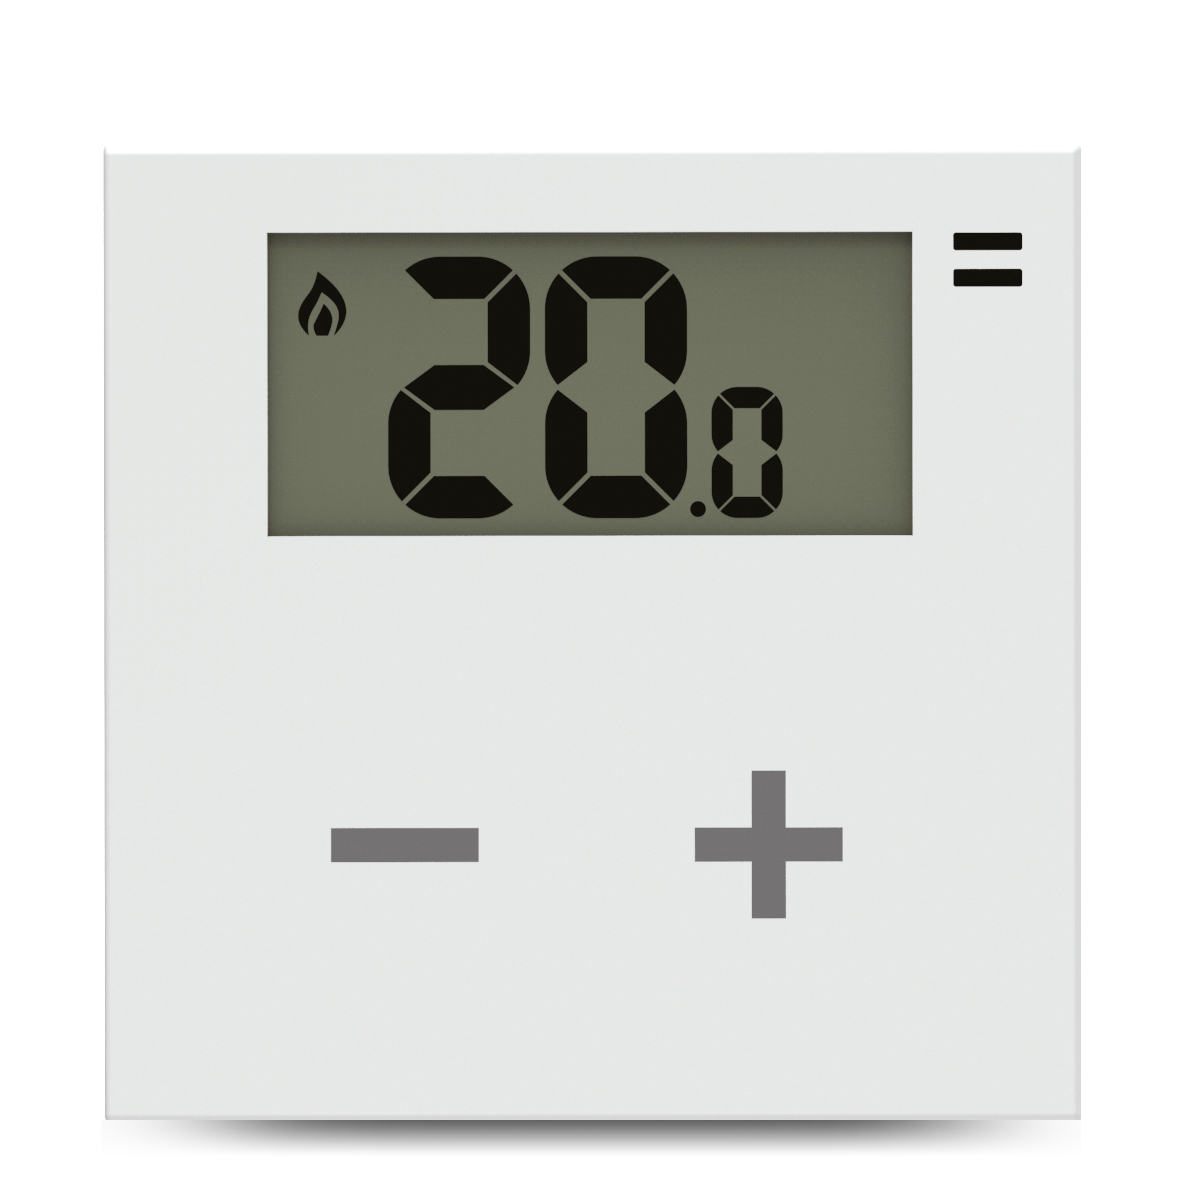 Additional Thermostat for your Halo Smart Living System